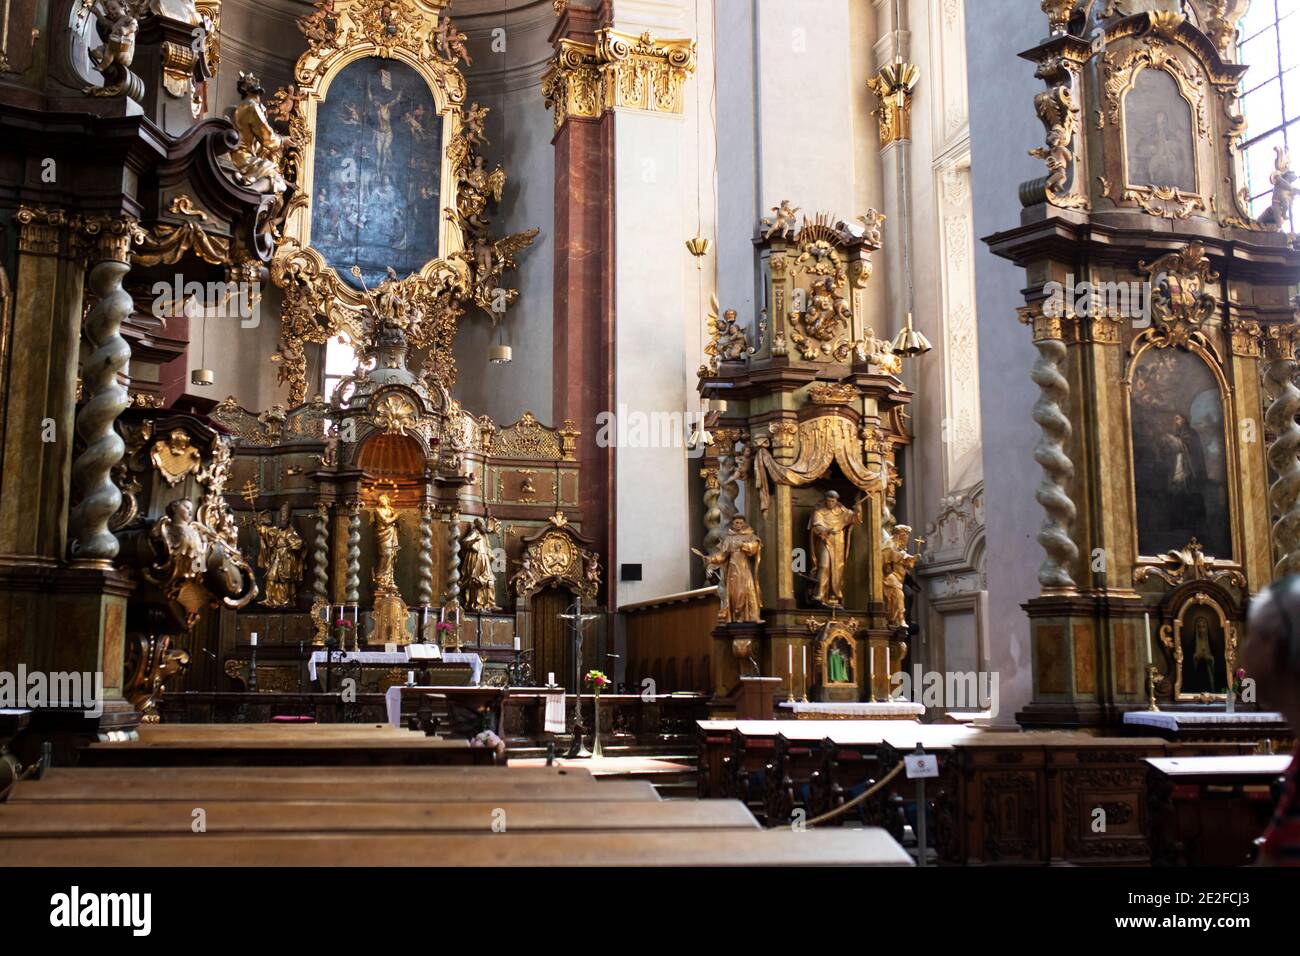 The interior and altar of Church of Our Lady Victorious and The Infant Jesus of Prague, a Baroque church from 1613 in Prague, Czechia. Stock Photo